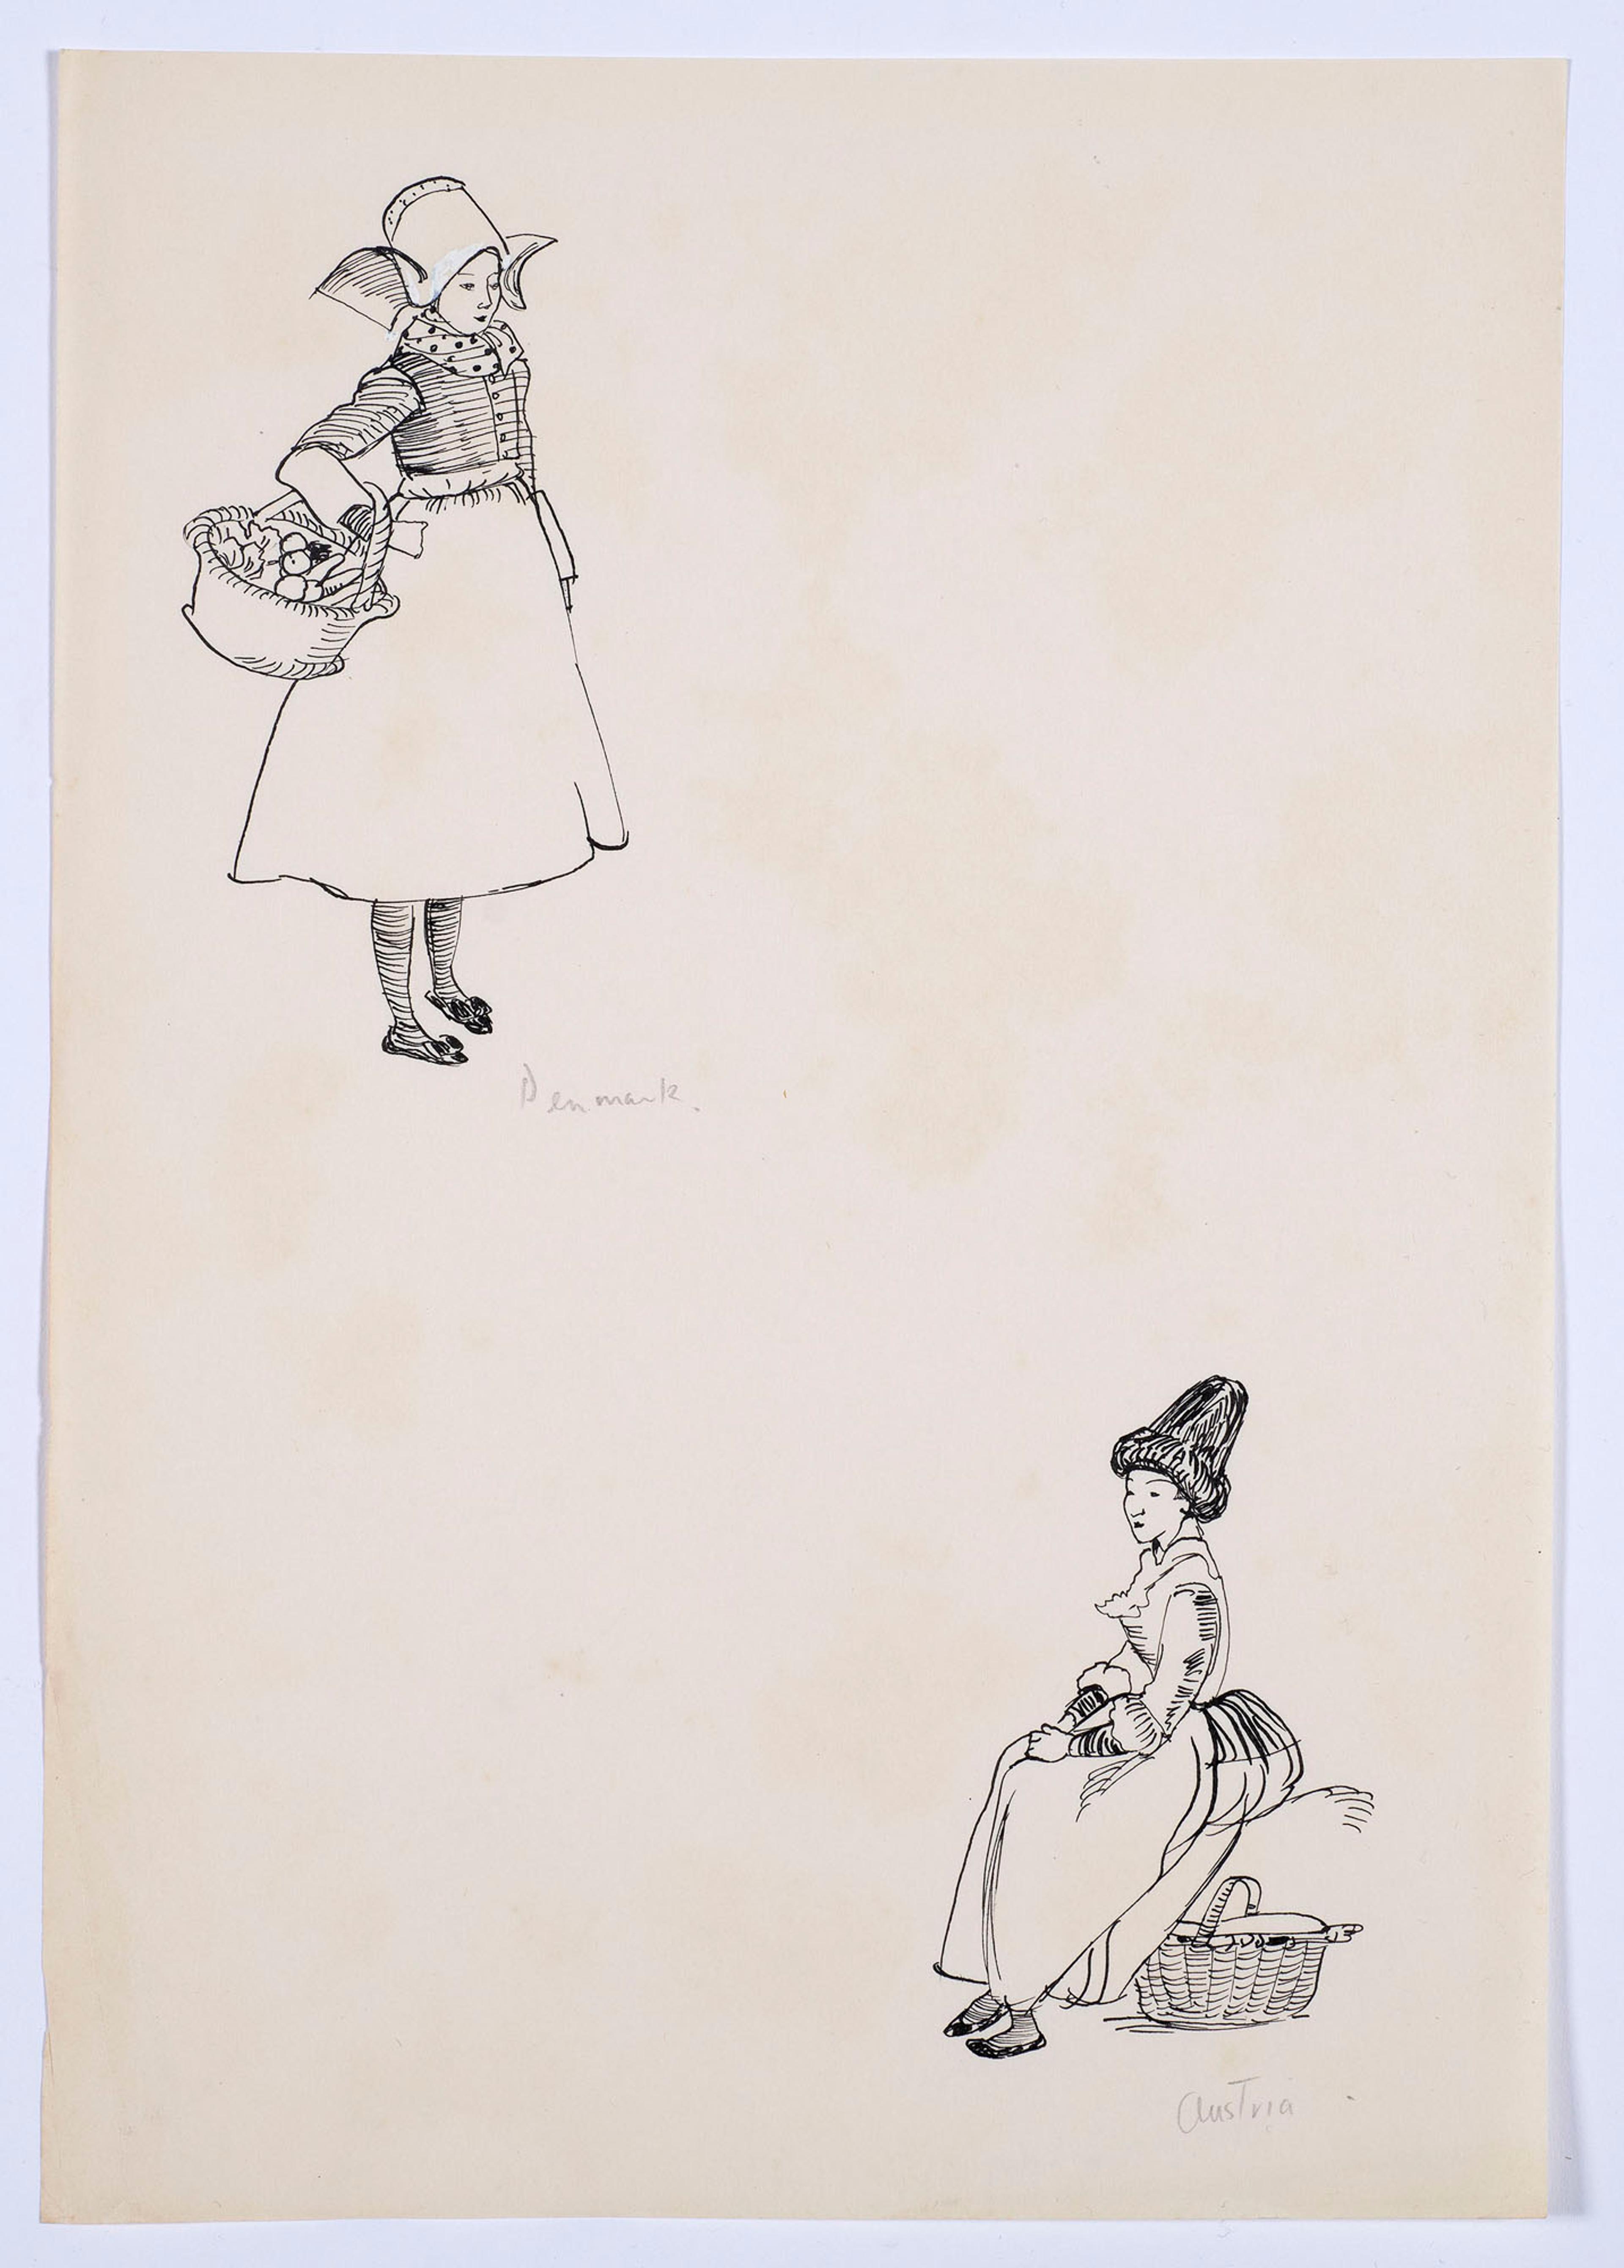 Black and white drawings of figures in Danish and Austrian national dress